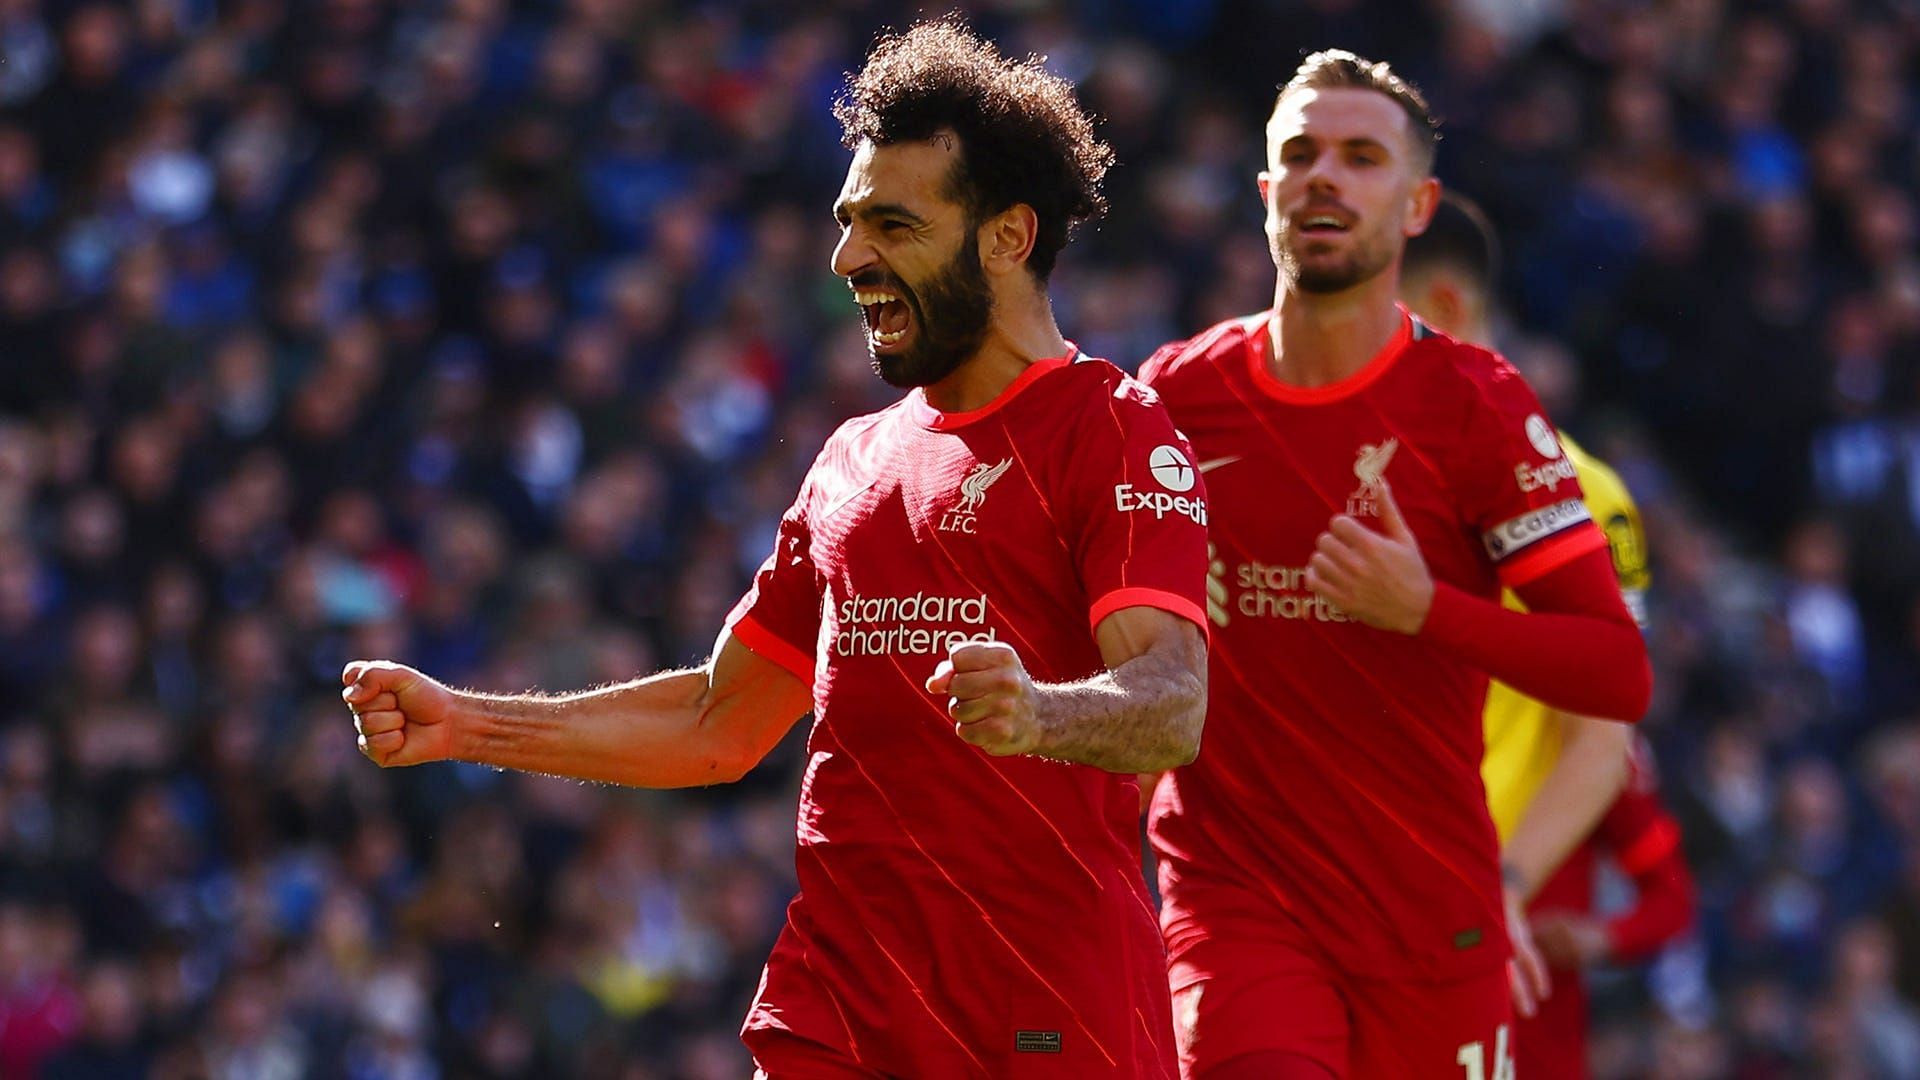 Salah was one of the top performers for Liverpool during 2021-22 Season